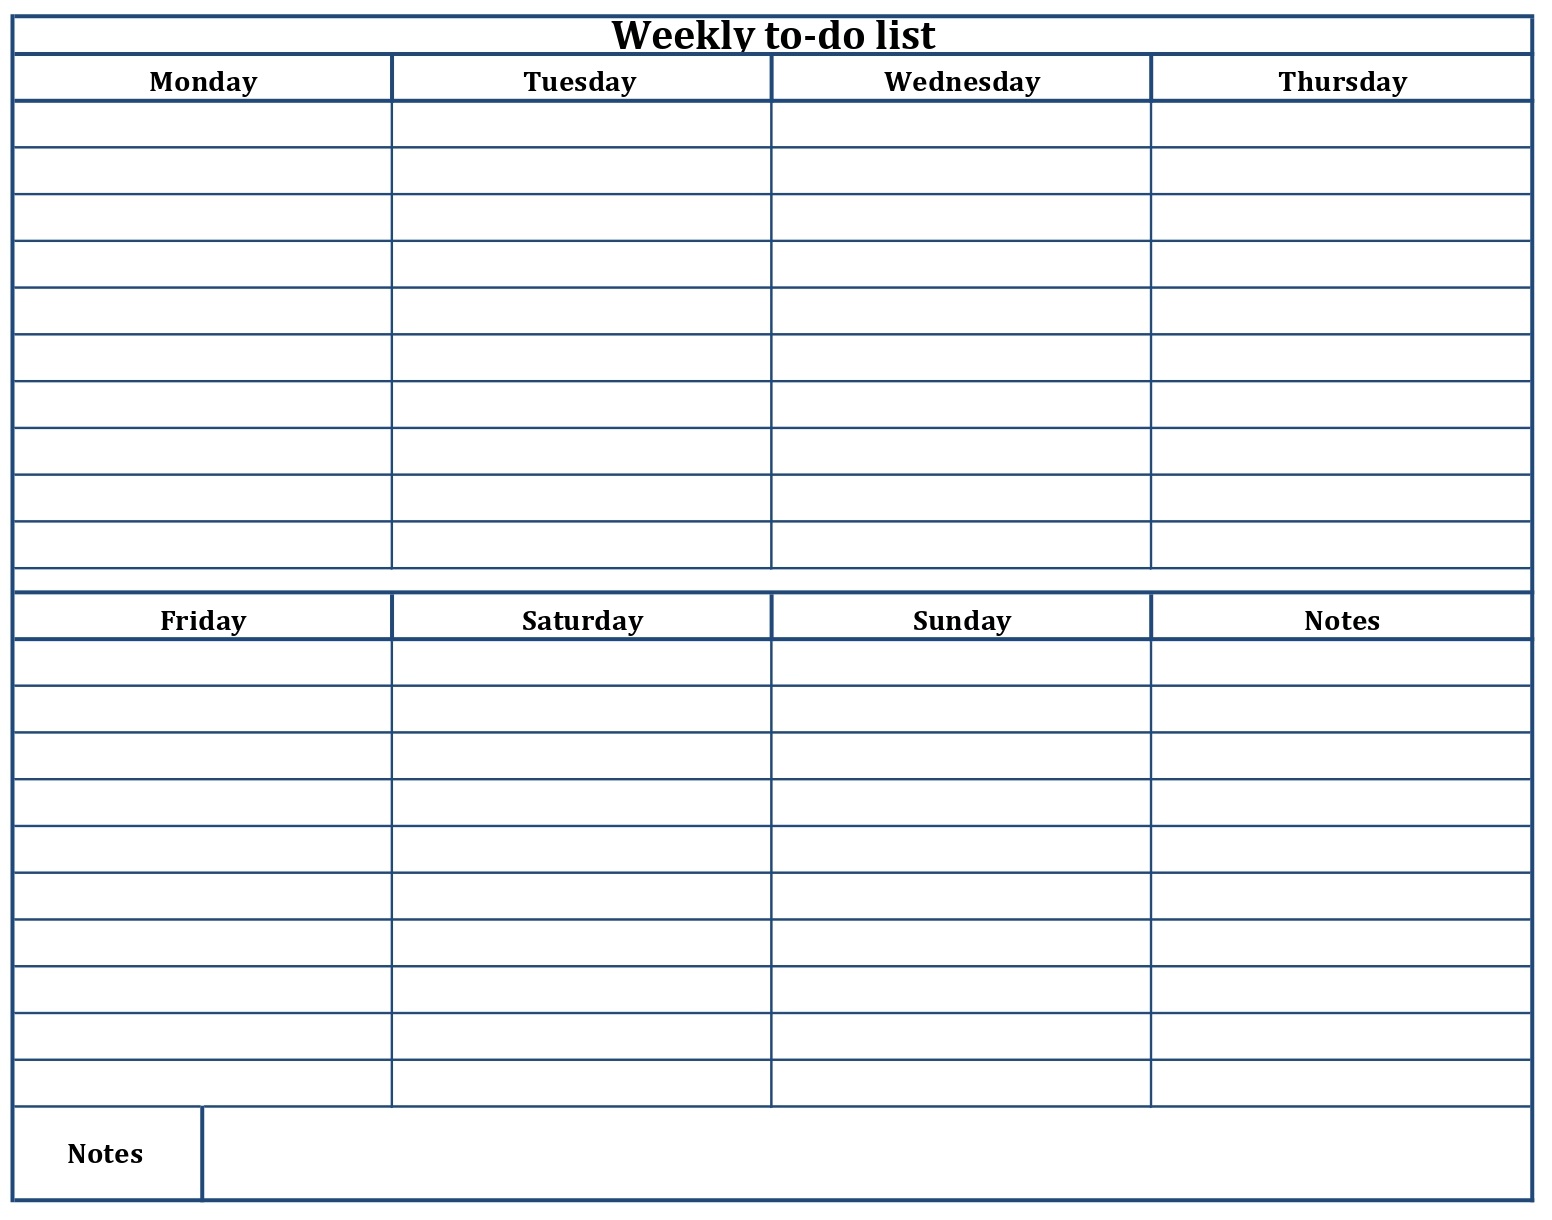 weekly to-do list printable free